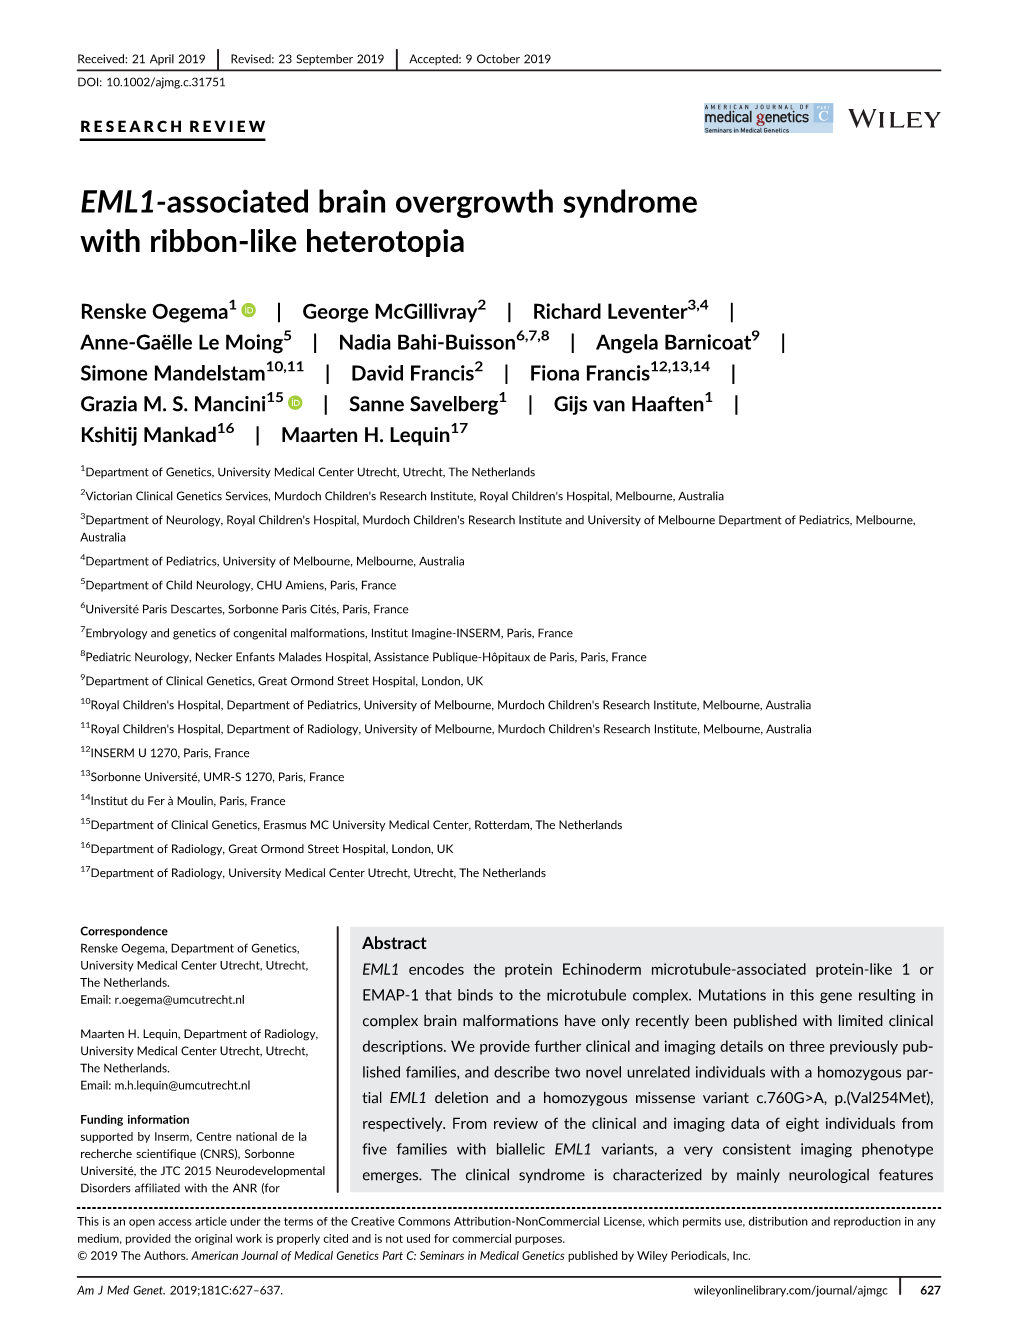 EML1-Associated Brain Overgrowth Syndrome with Ribbon-Like Heterotopia